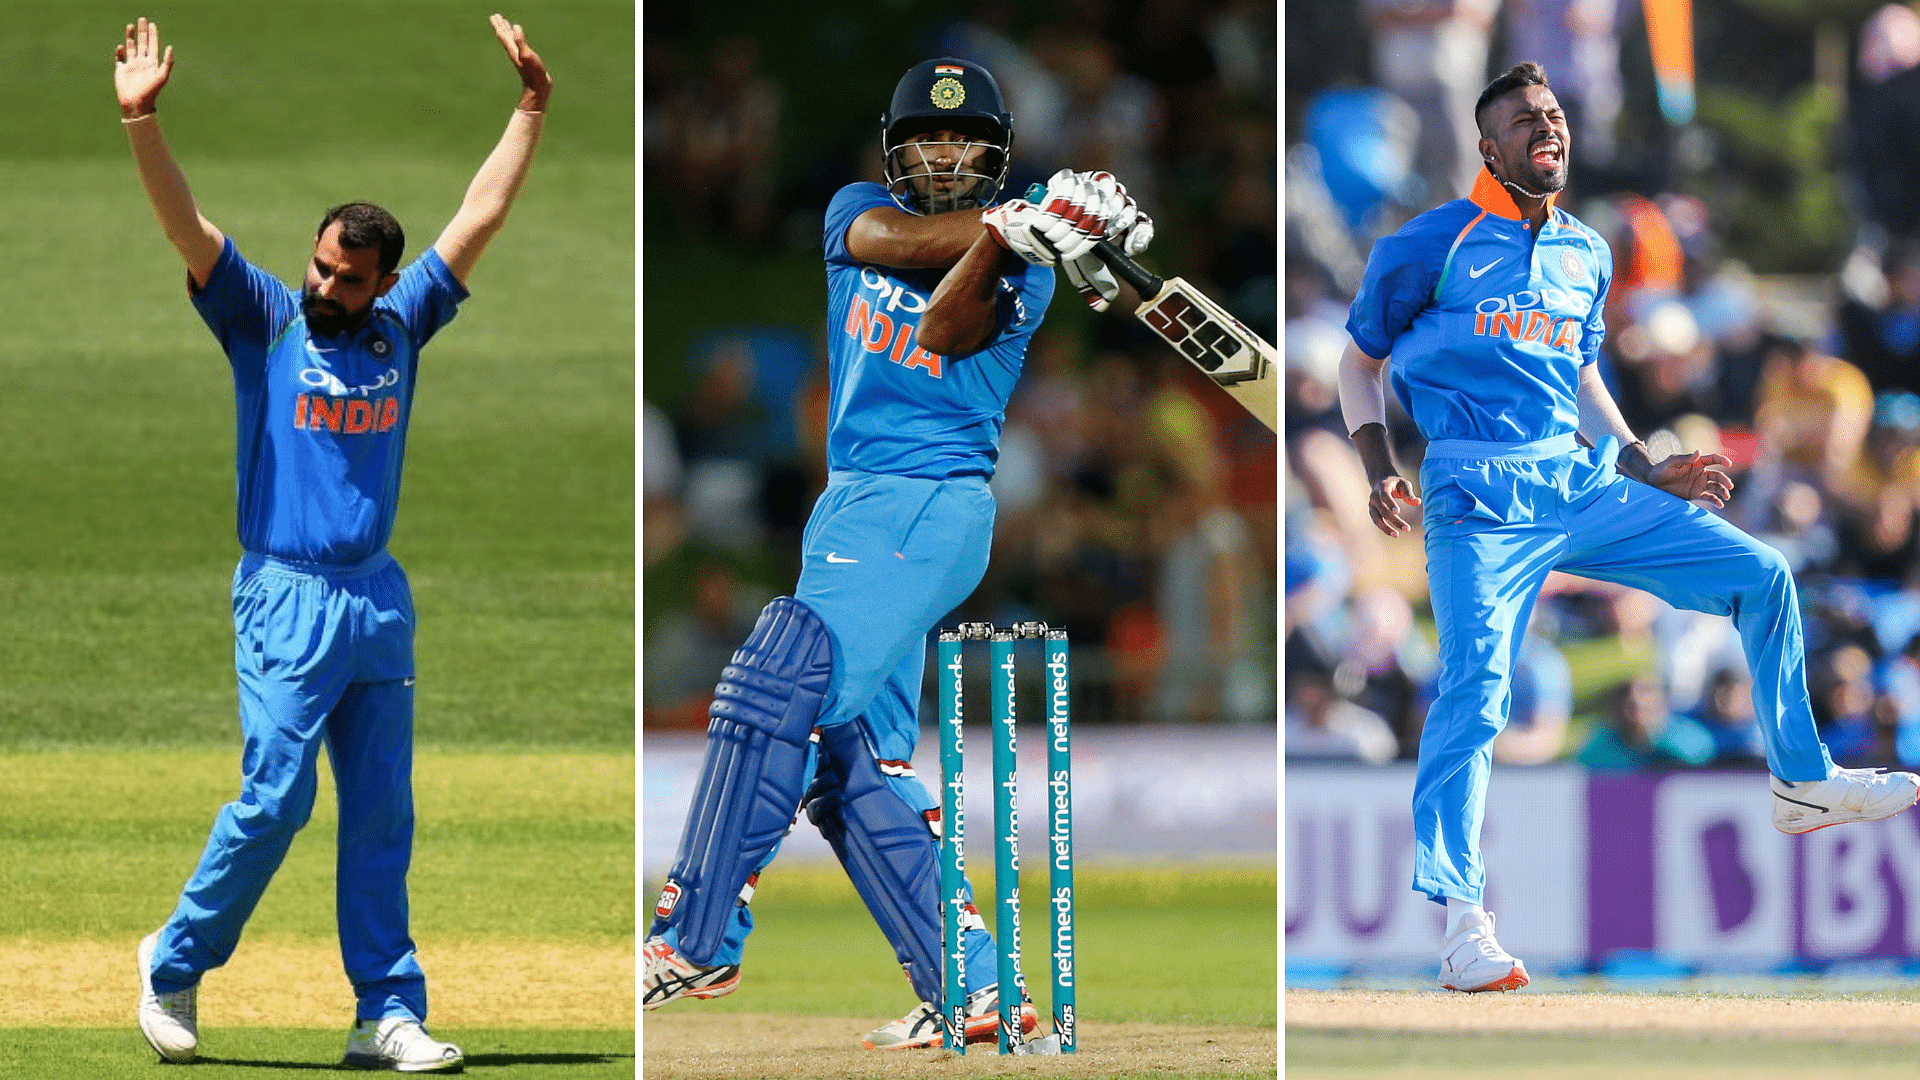 A look at how India’s players fared in their ODI series win in New Zealand.